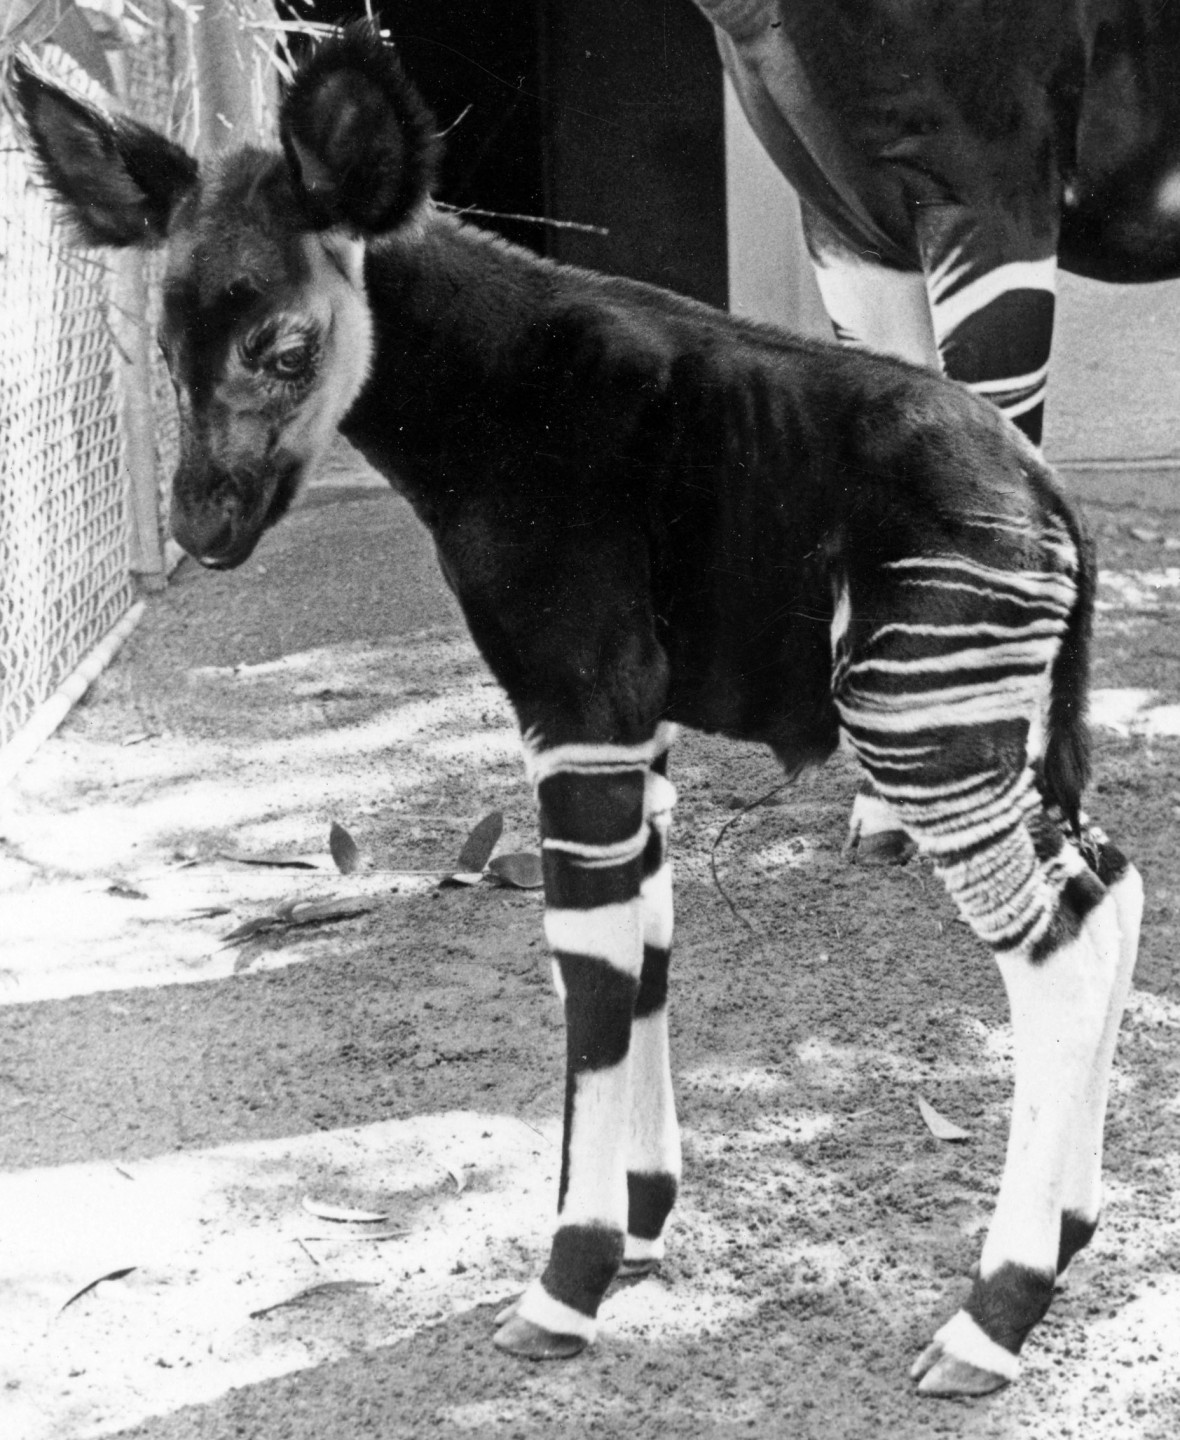 Female okapi Kitambala gave birth to the Zoo's first okapi calf on February 8, 1962. The little male calf was the fourth okapi born in the United States. Because he was so active from the start, the keepers named him Baruti, which means dynamite in Swahili.